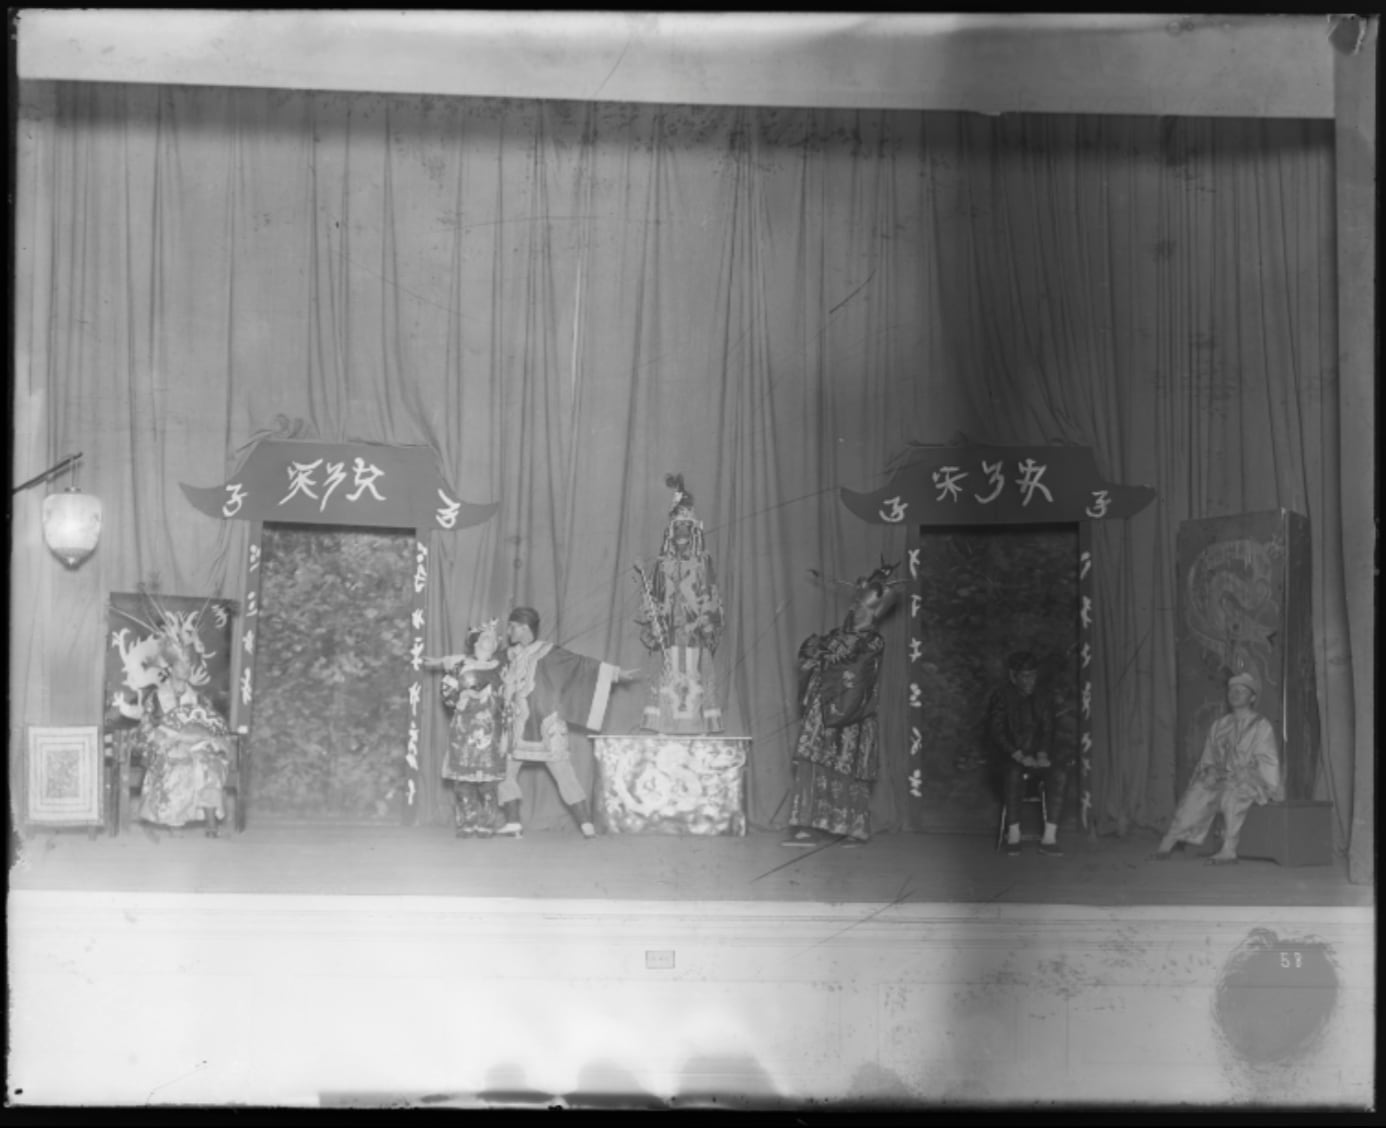 A black-and-white historical photo of a theatrical production featuring costumed actors and stage settings that are intended to look Chinese.